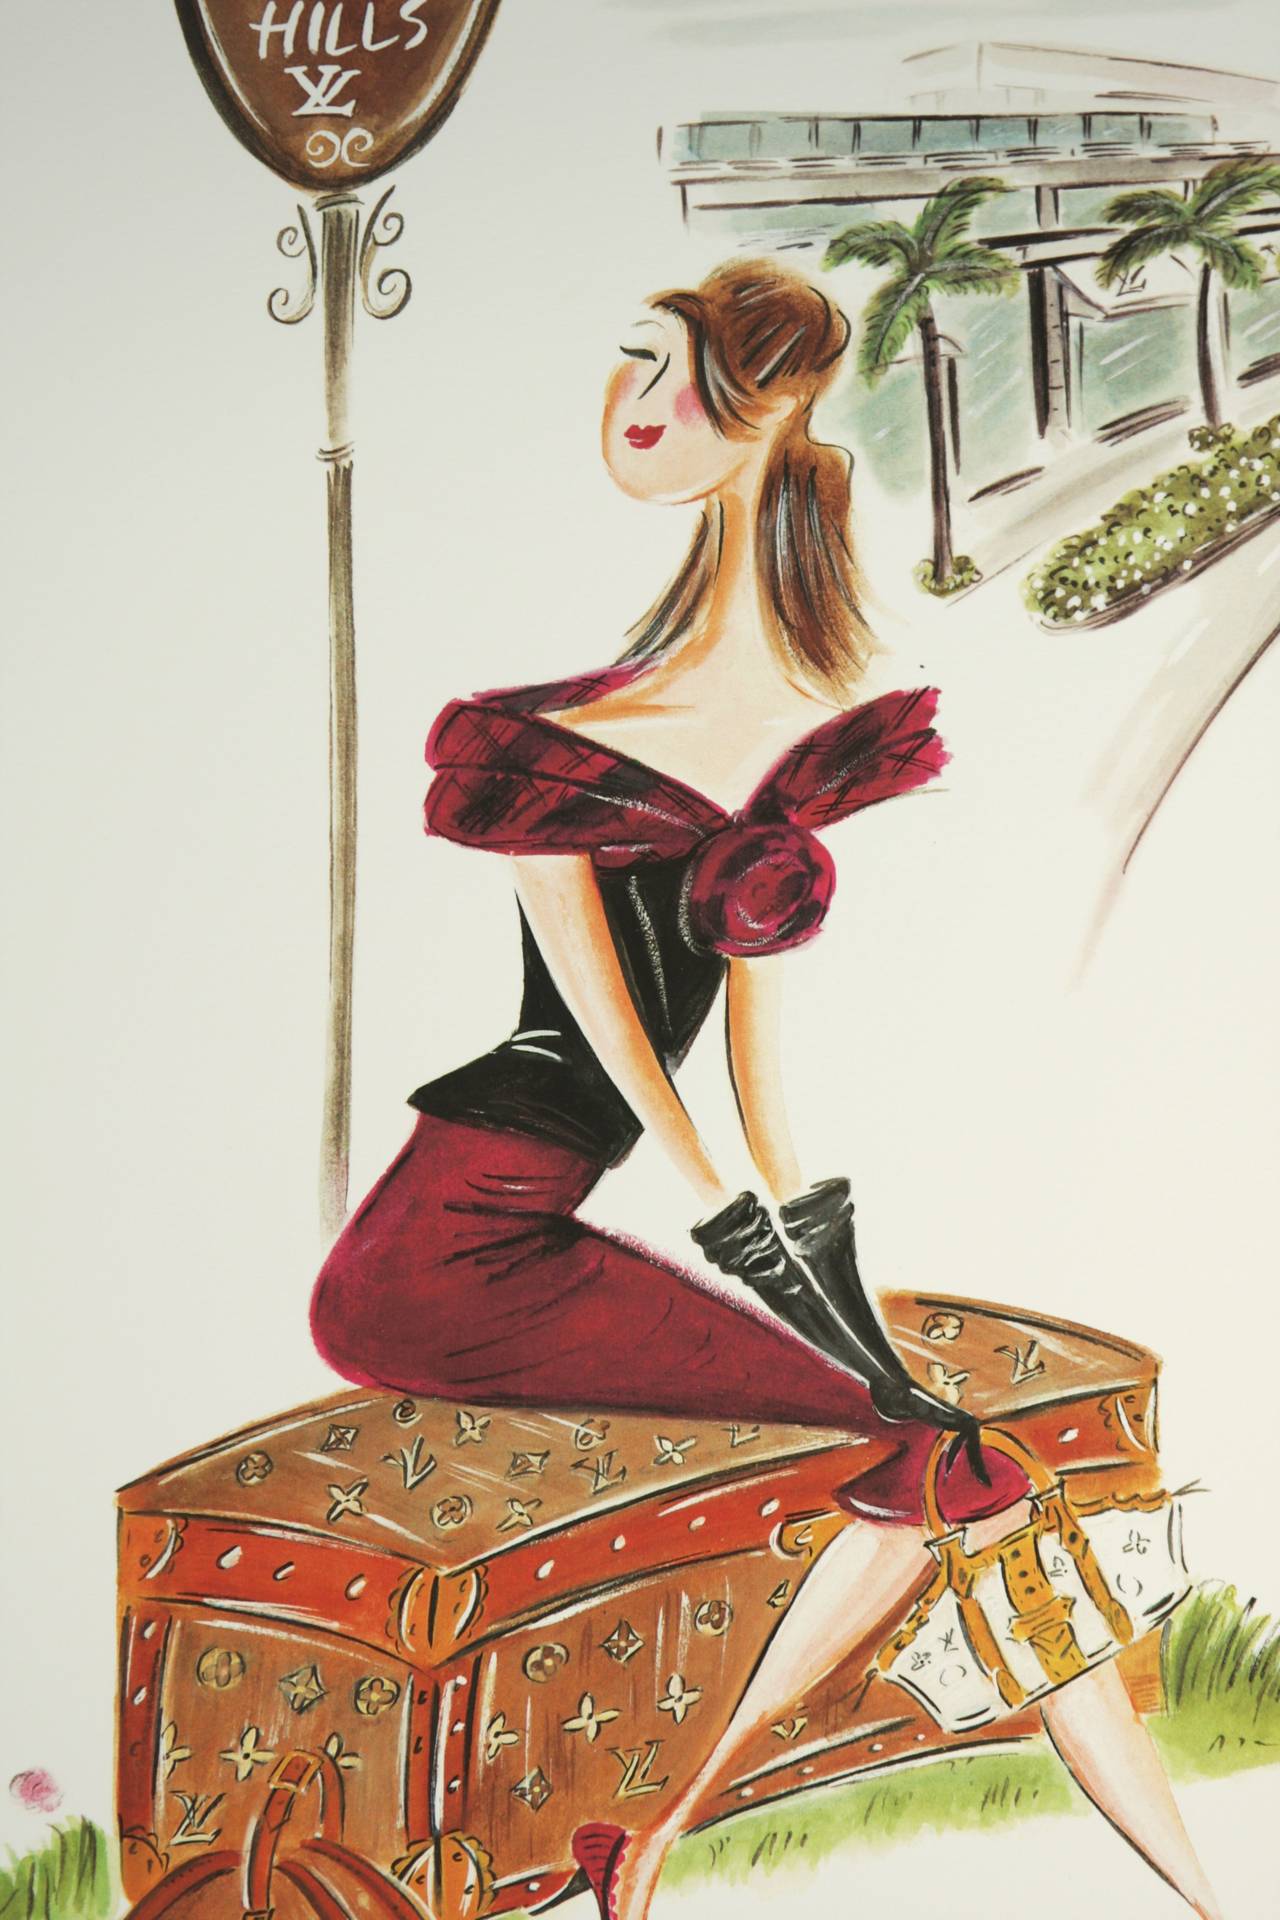 For the Love of Louis Vuitton Beverly Hills by Chesley McLaren c. 2004 Art Print at 1stdibs